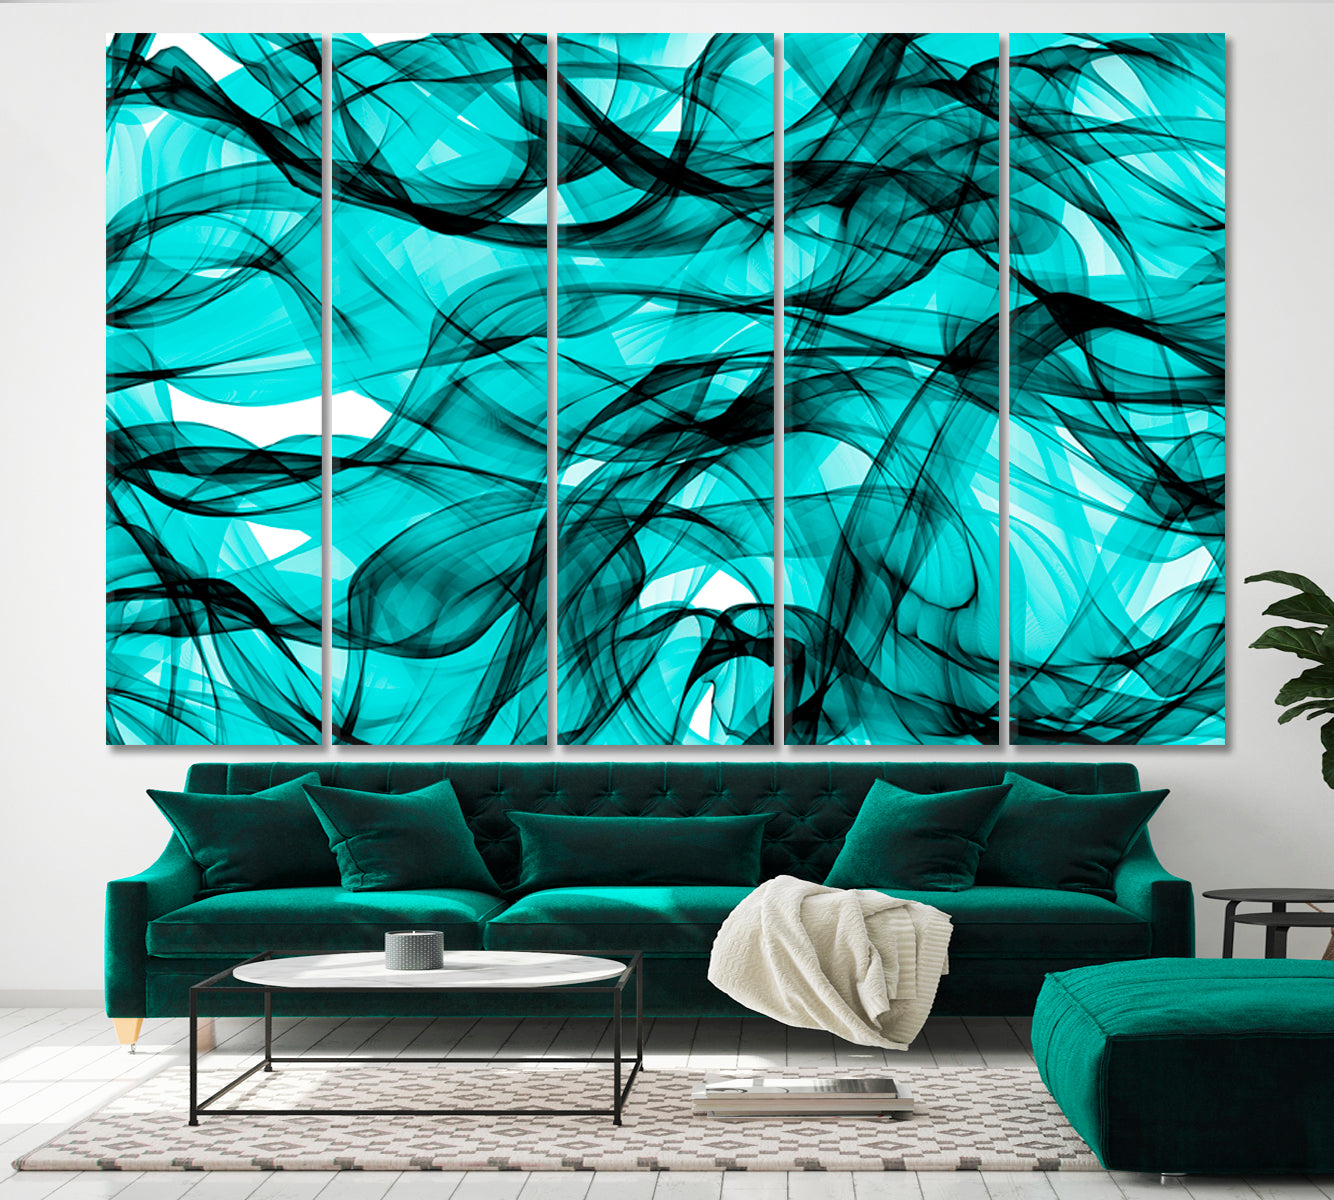 Fantasy Chaotic Fractal Pattern Abstract Shapes Curly Lines Waves Fluid Art, Oriental Marbling Canvas Print Artesty 5 panels 36" x 24" 